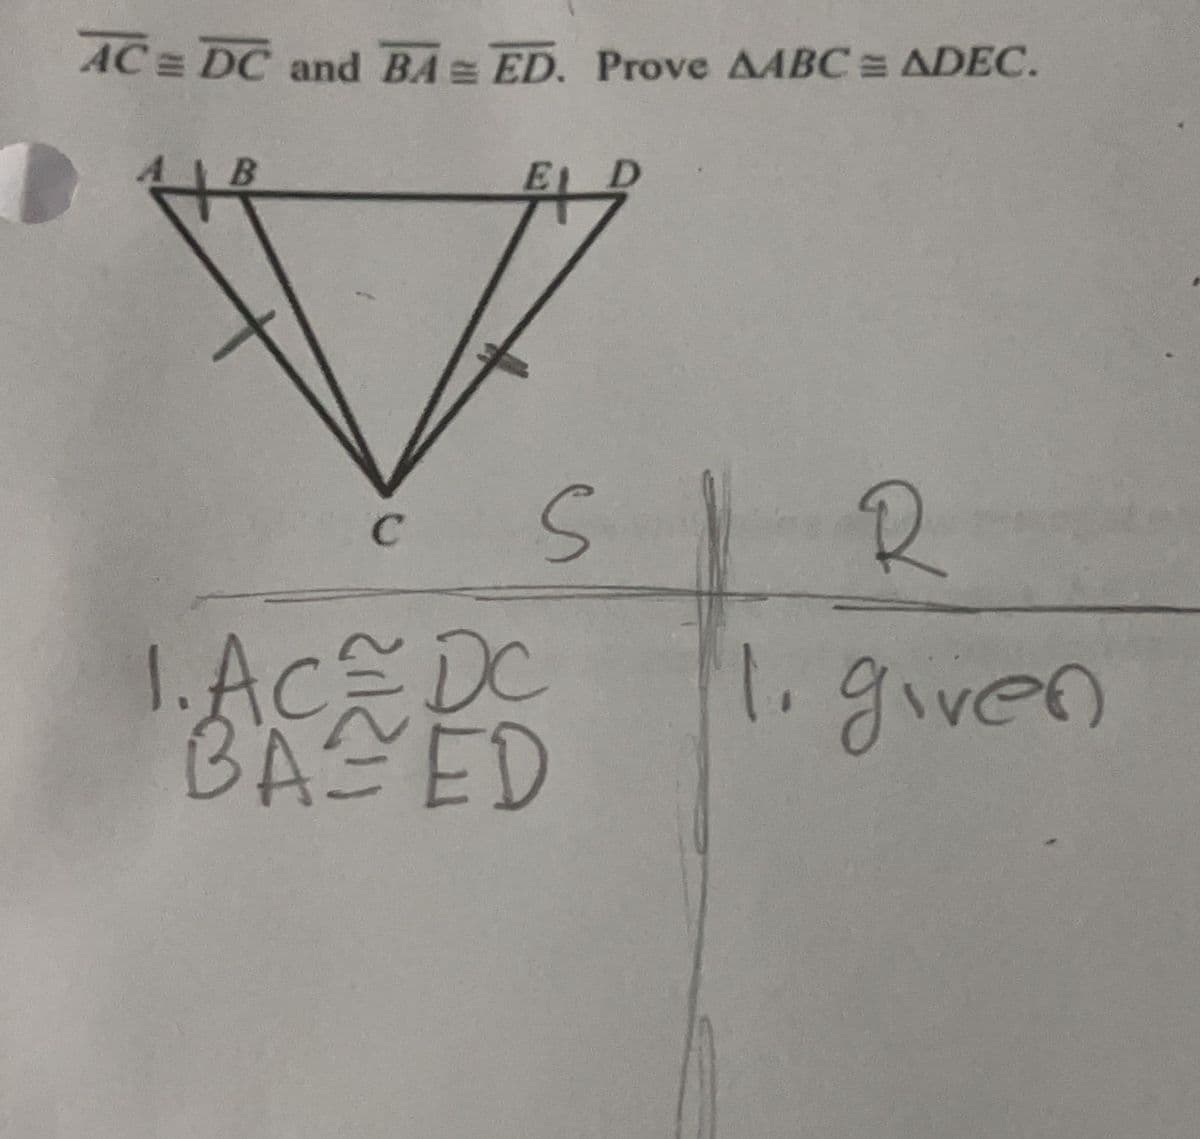 AC= DC and BA ED. Prove AABC = ADEC.
D.
R.
C
1.Ac DC
BASED
1.given
